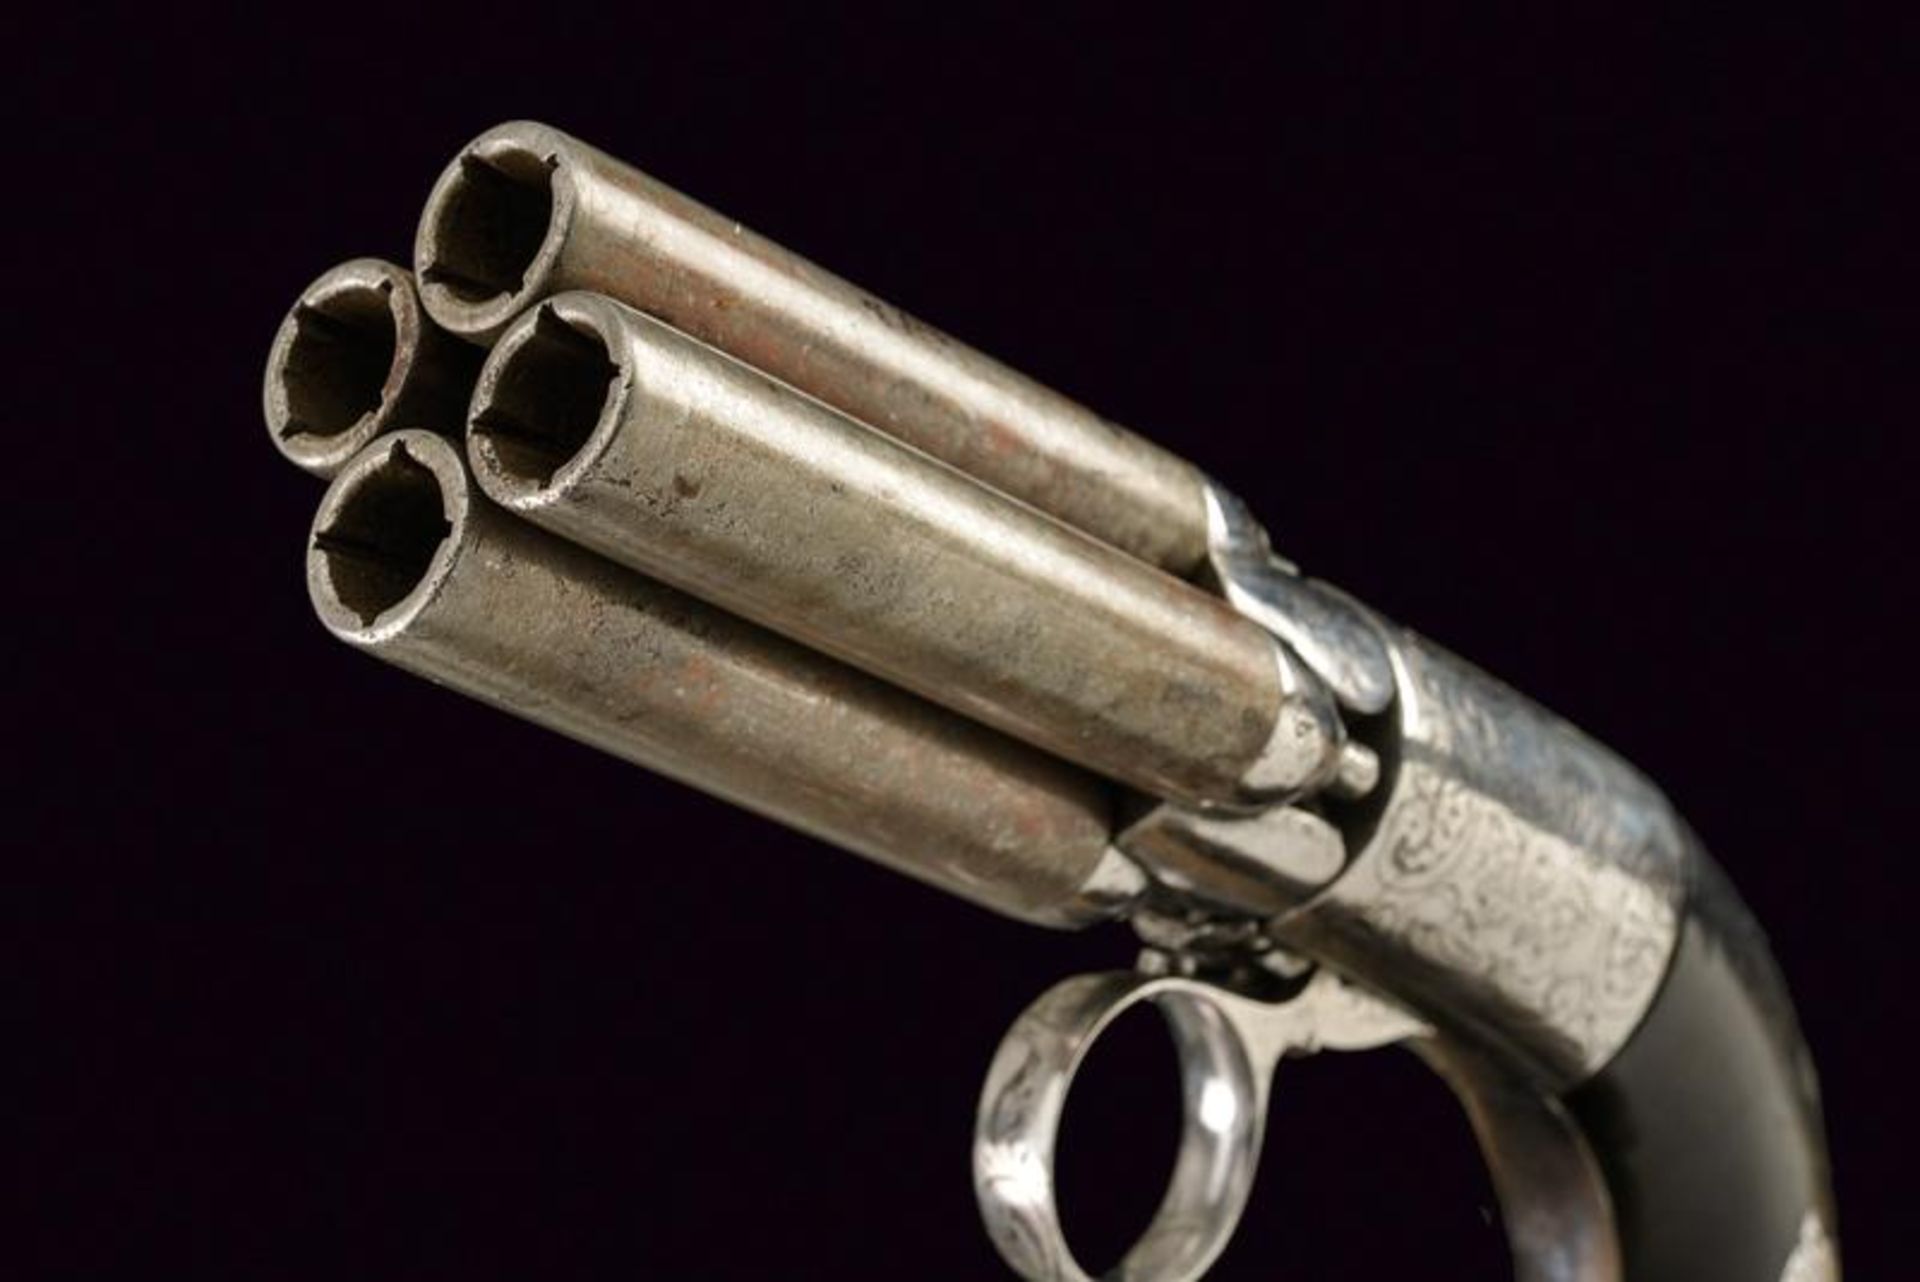 A four barrelled pepperbox percussion revolver by Mariette - Image 2 of 3